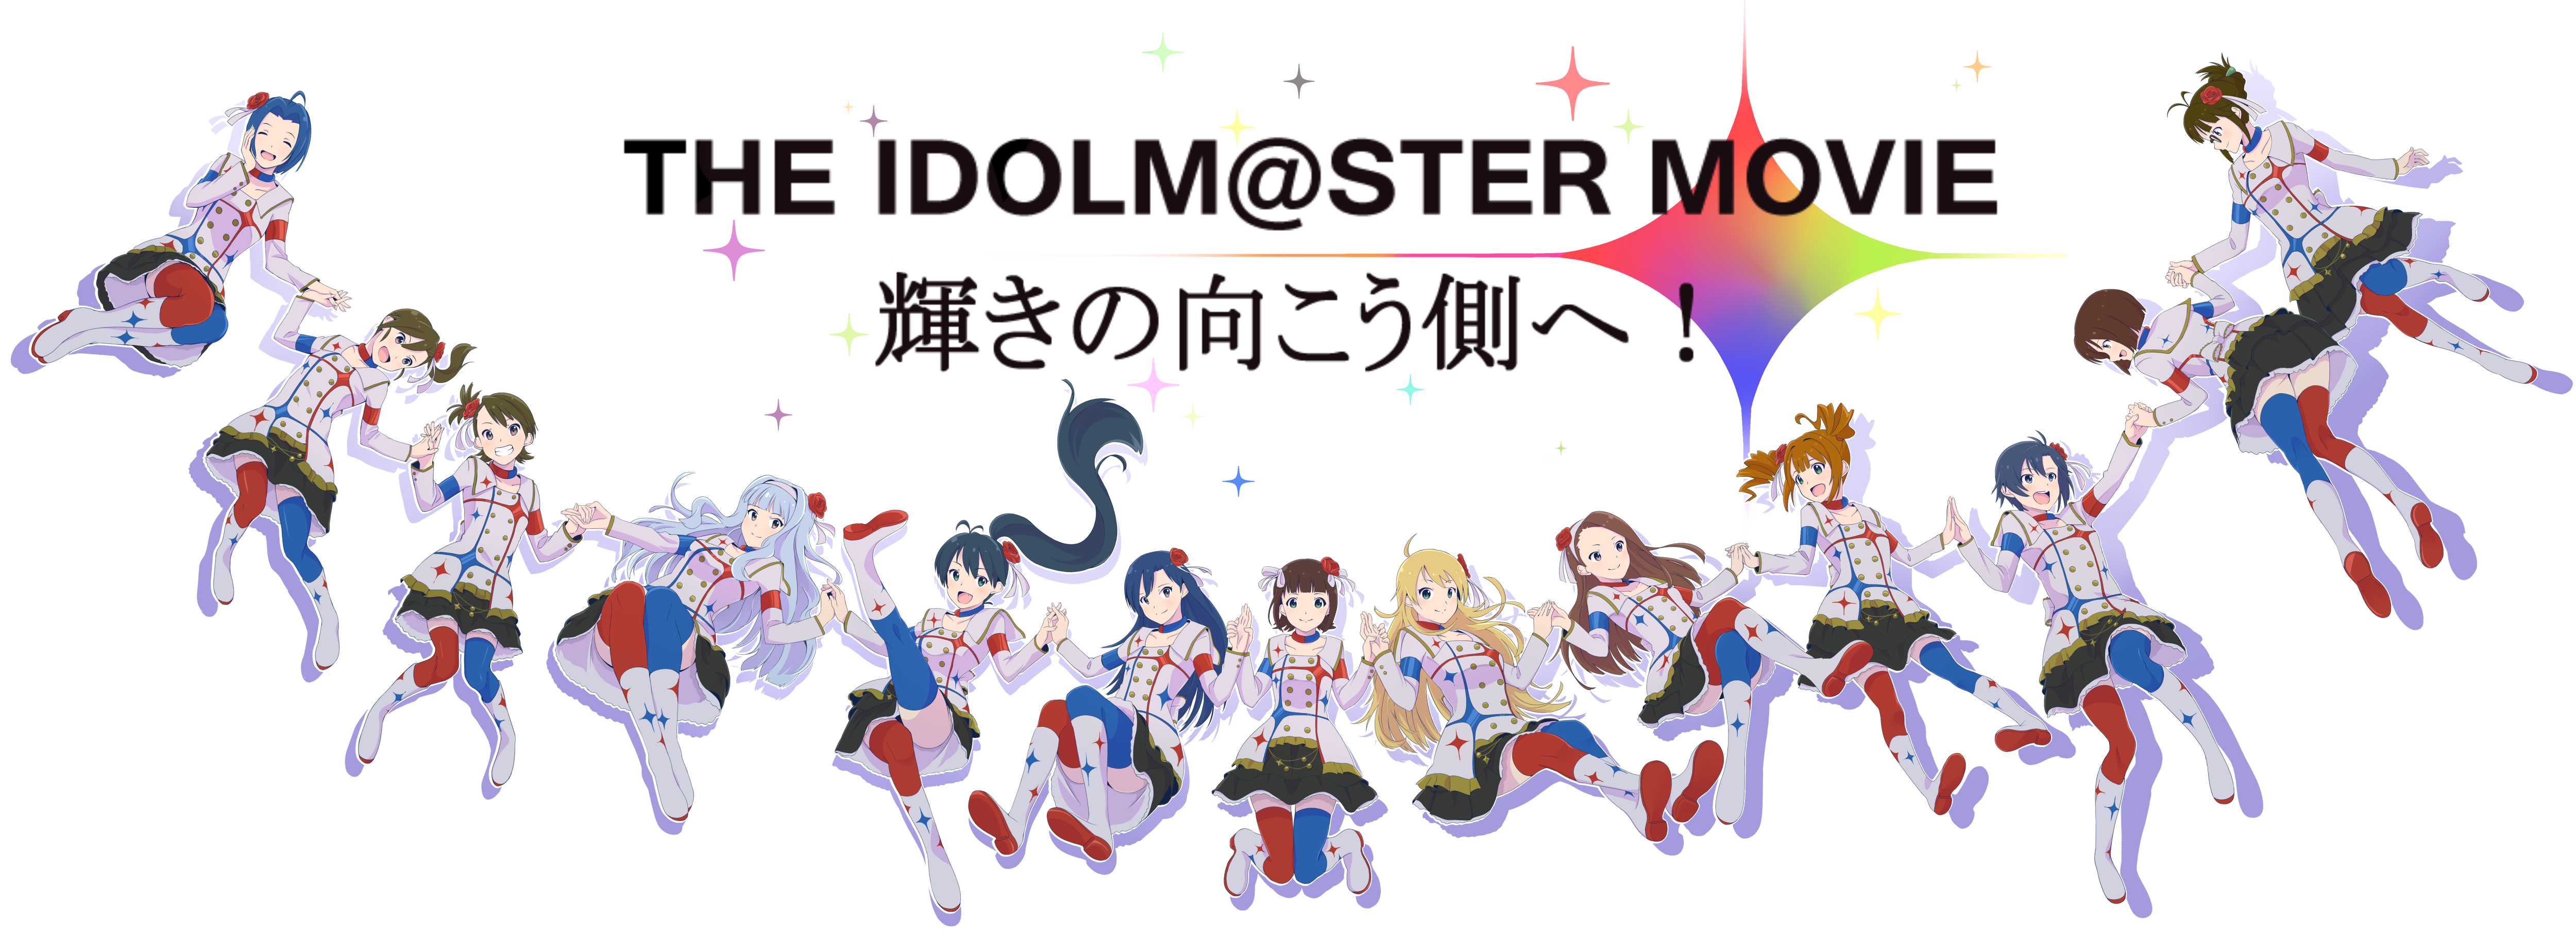 Anime The iDOLM@STER HD Wallpaper by ２番目のむ～みん